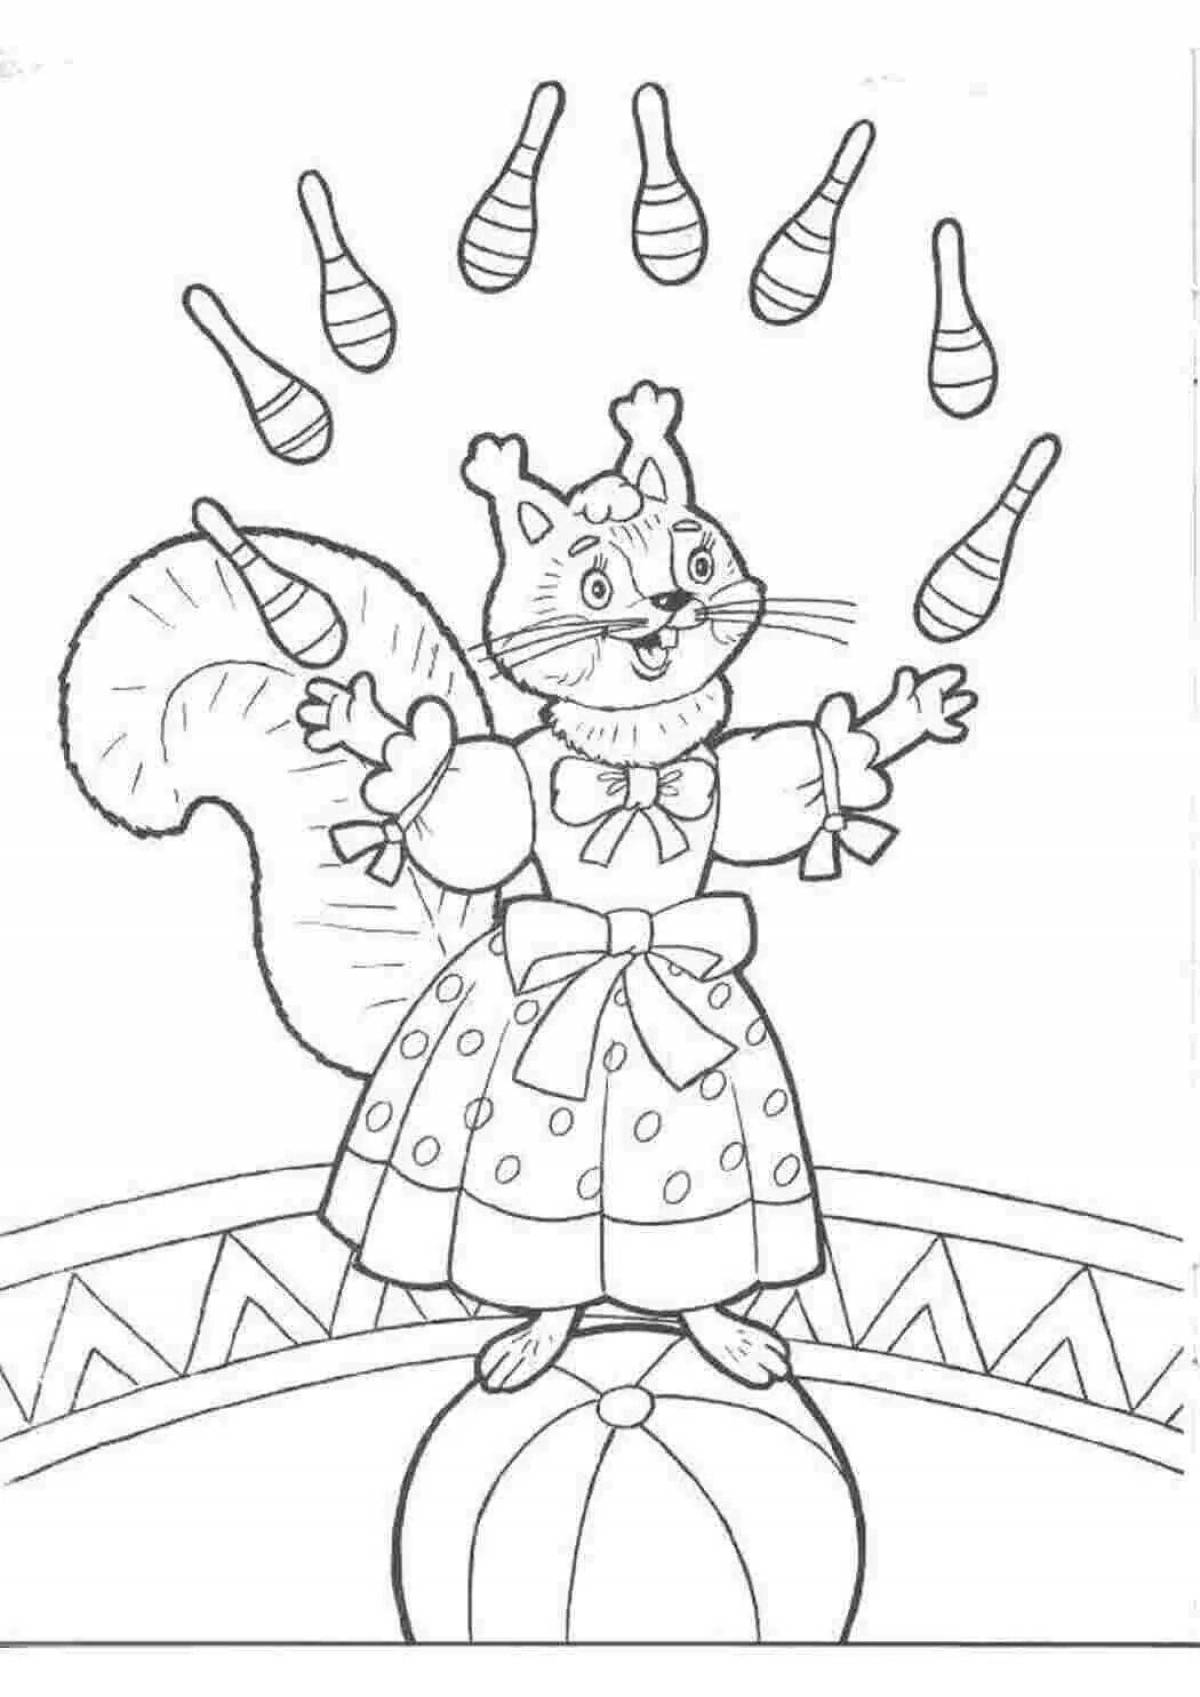 Live circus coloring book for kids